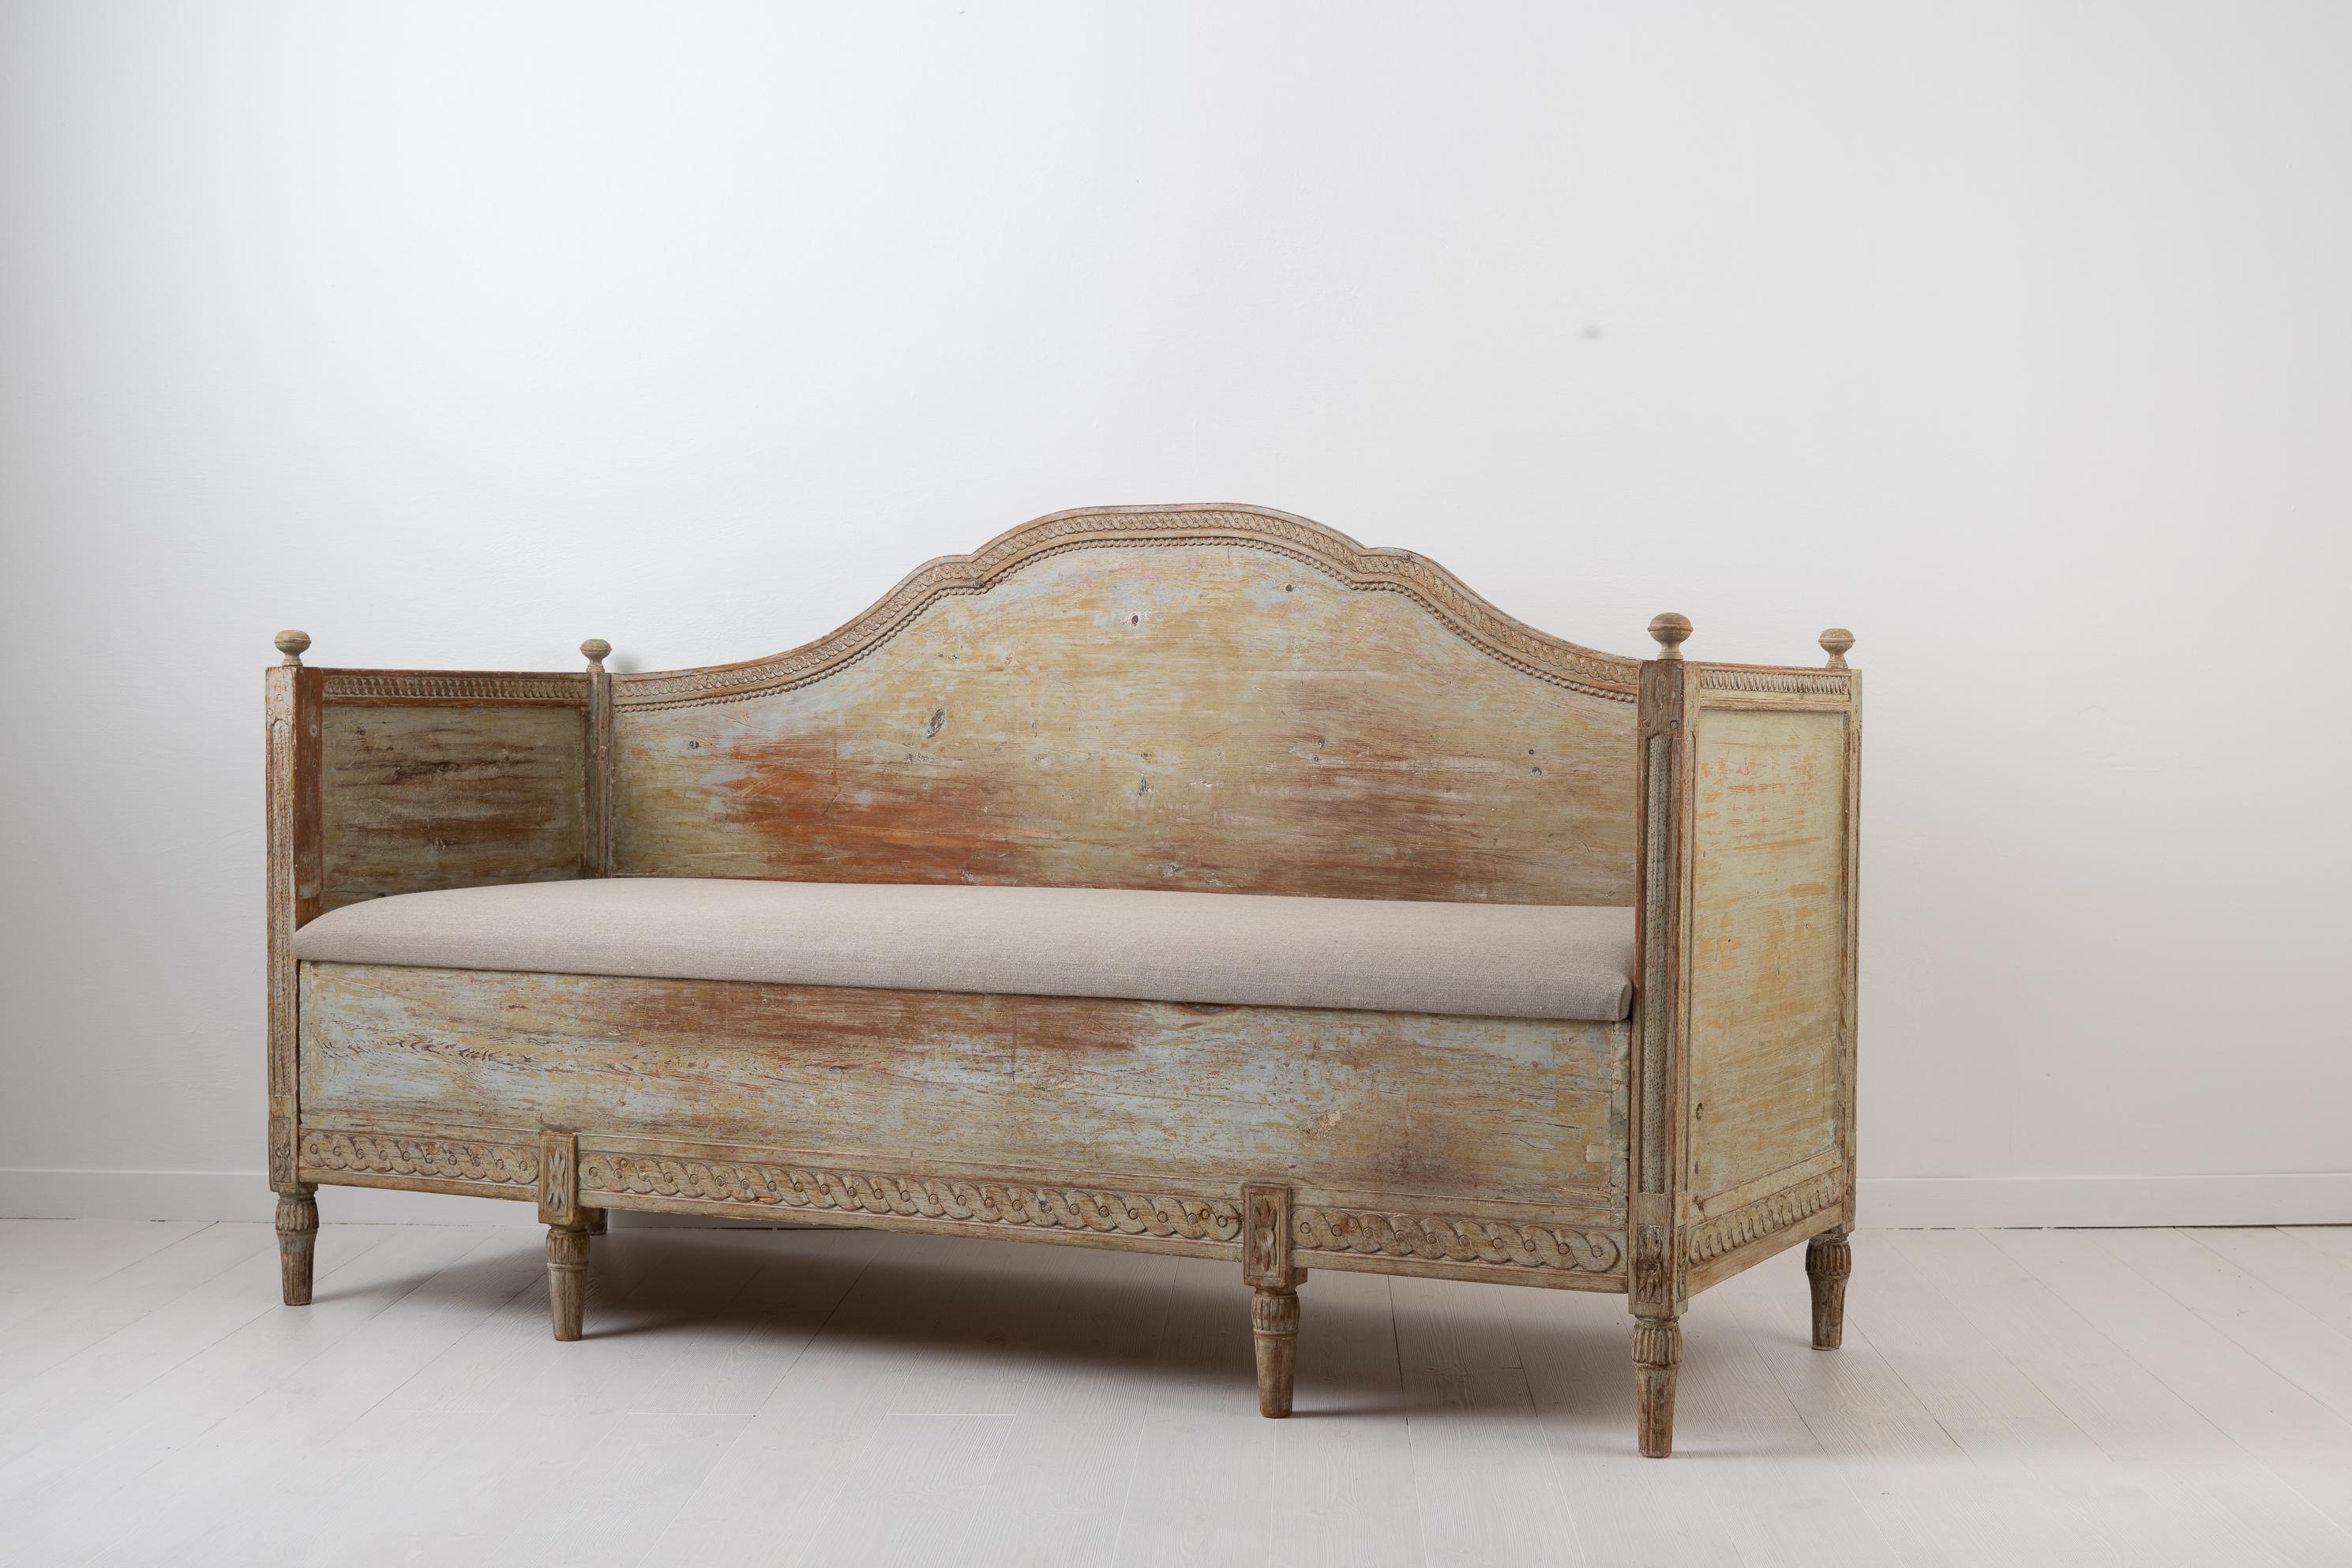 Antique Swedish sofa from the late 18th century. The sofa or bench is made from Swedish pine and painted with the original first layer of paint. The sofa is Gustavian in Swedish terms which is equivalent to the more international neoclassical